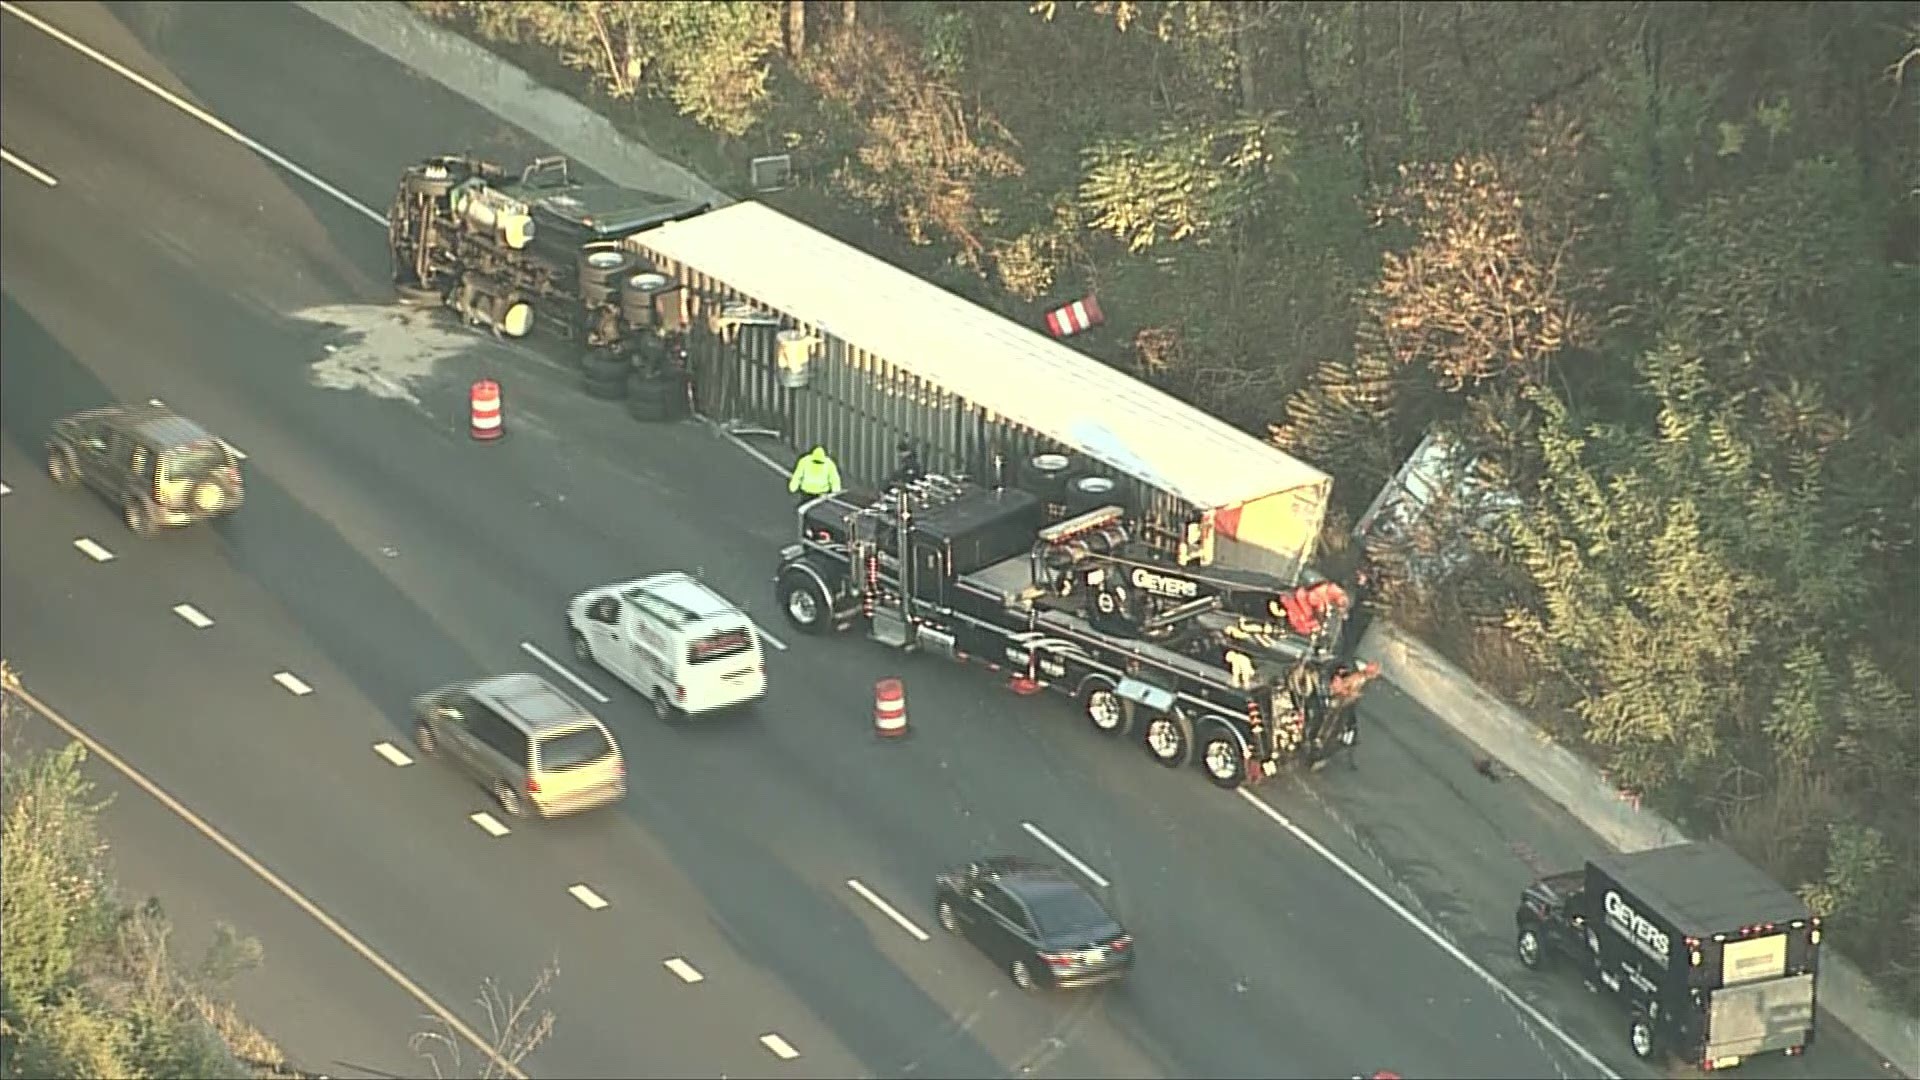 Crews are at the scene of an overturned tractor-trailer on the outer loop of I-495 near Rockville Pike.